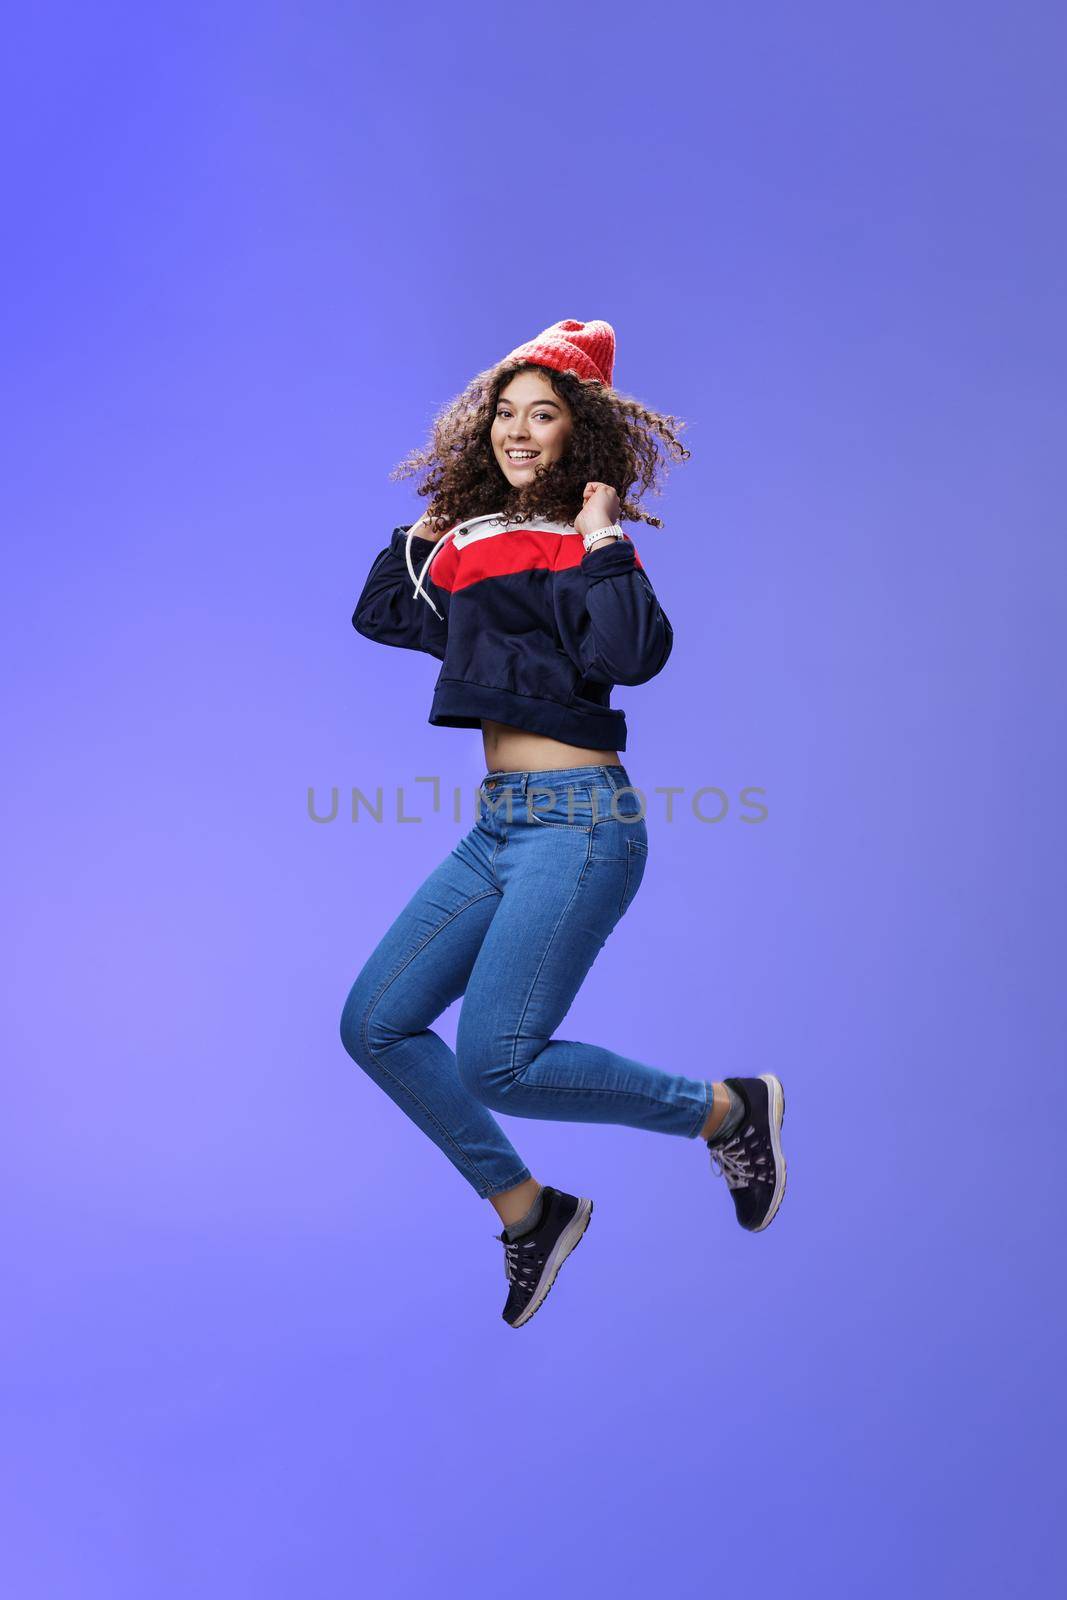 Studio shot of cute girl with curly hair in beanie sweatshirt and sneakers jumping playful and carefree over blue background, having fun enjoying cool weather smiling broadly as flying in air by Benzoix